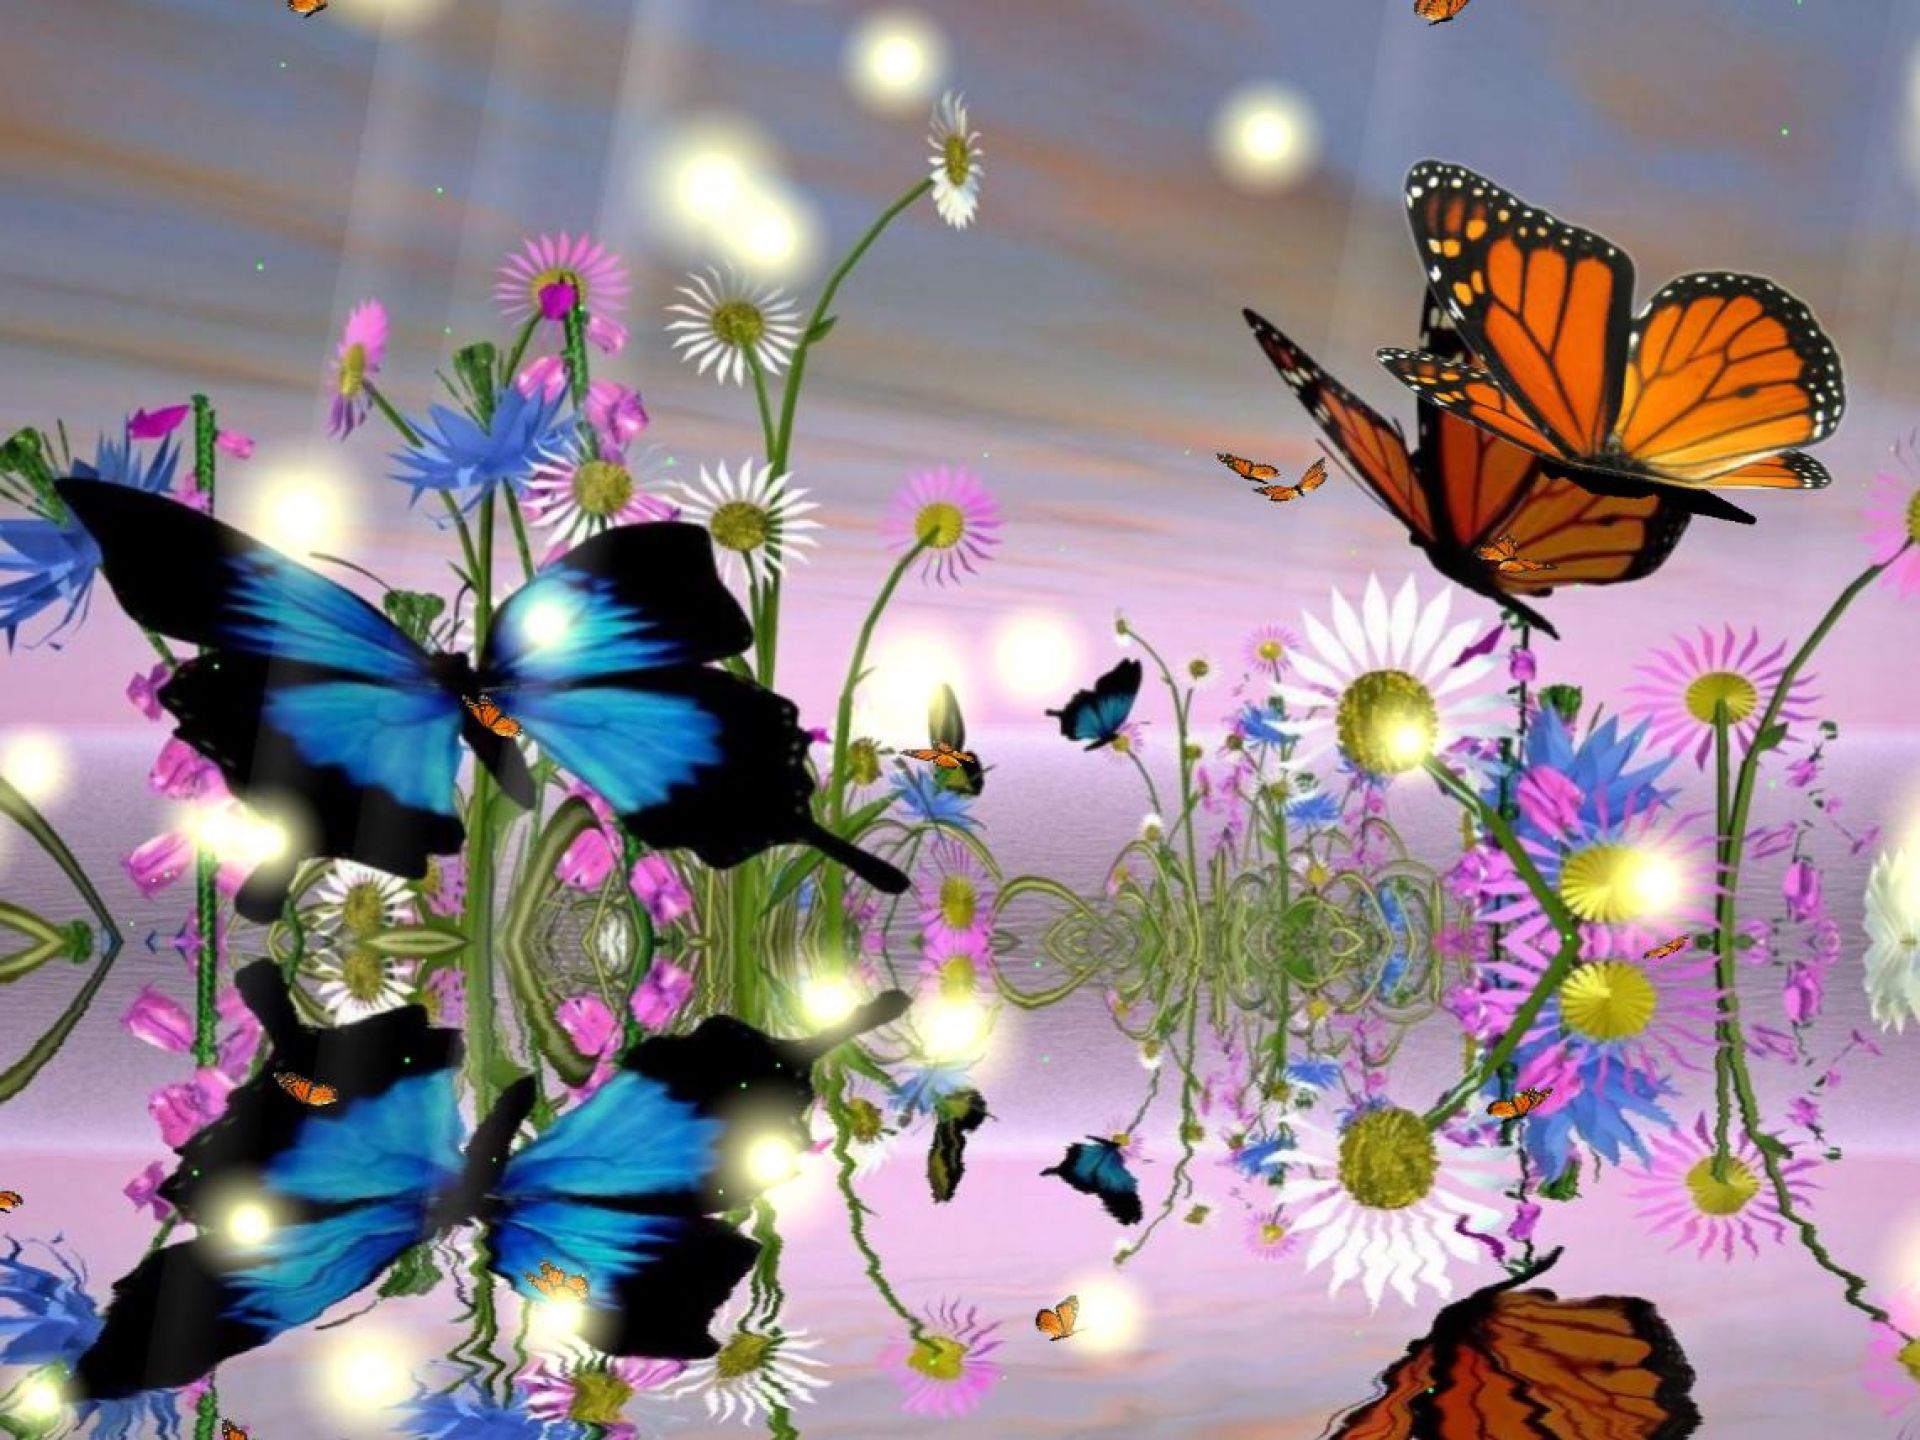 Butterfly desktop wallpaper tags animated butterflies animated butterflies desktop â butterfly wallpaper free flower wallpaper butterfly wallpaper backgrounds